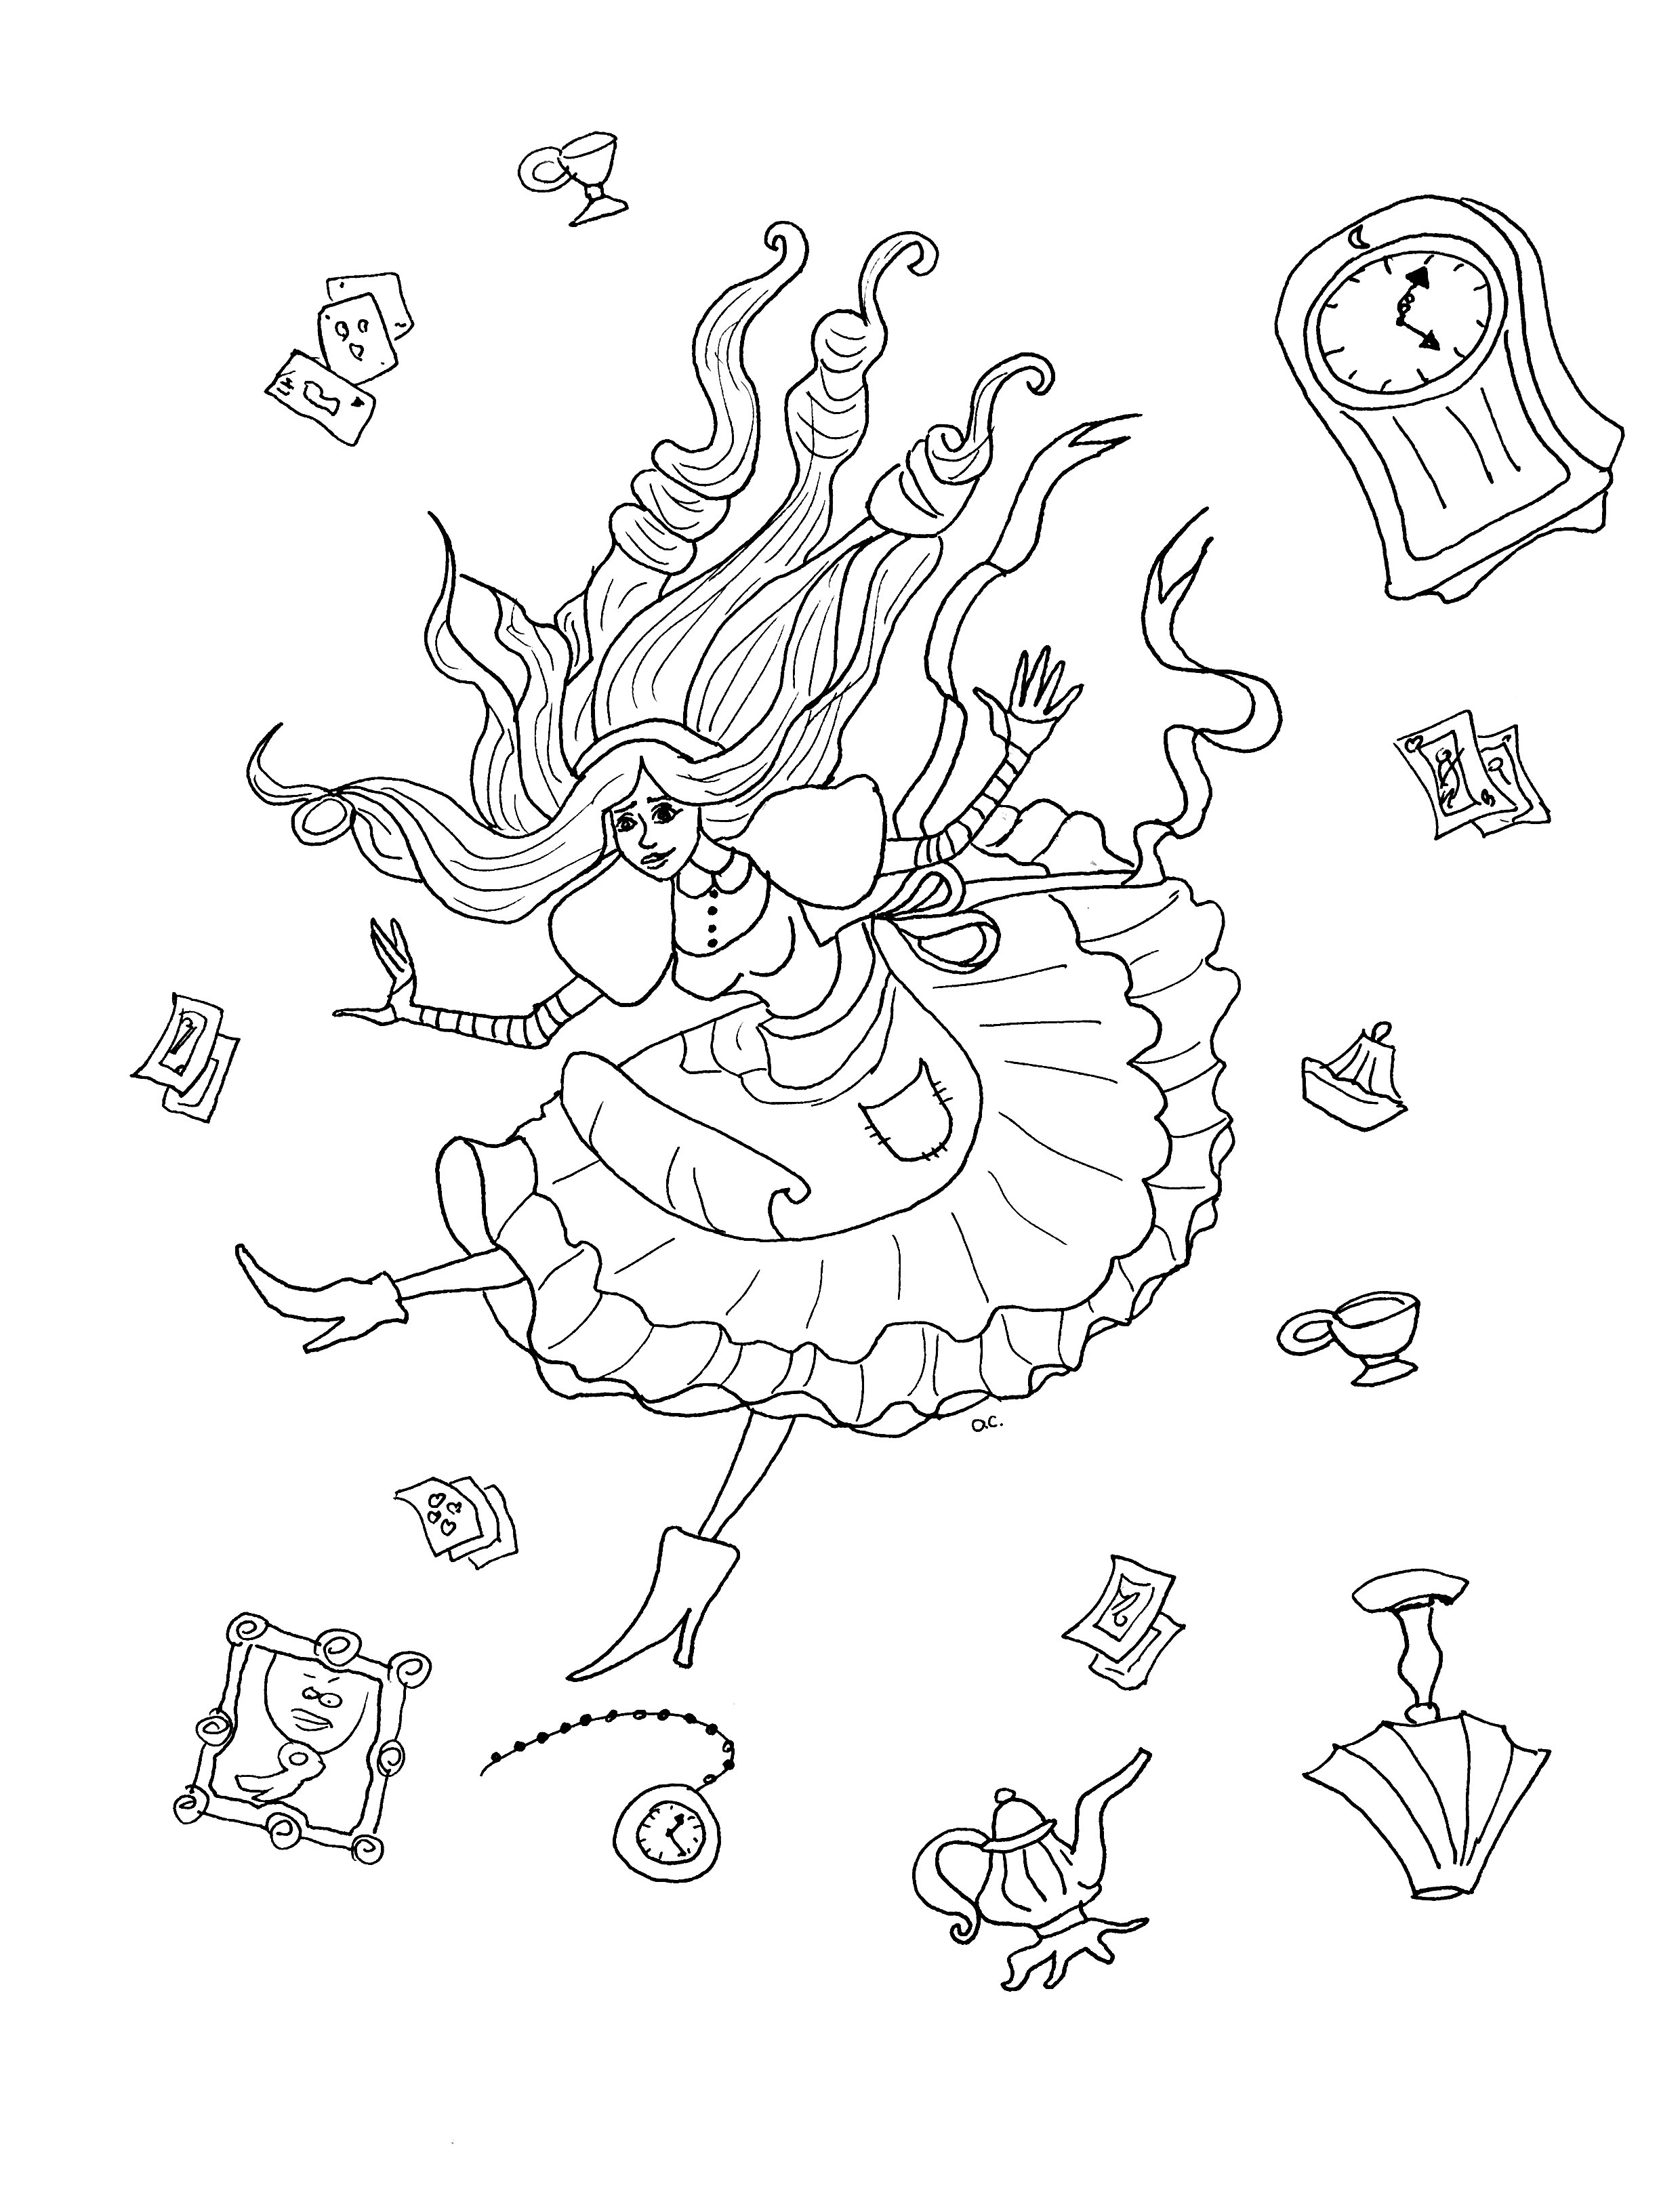 Original coloring page inspired by Alice in Wonderland (version 2 with objects), Artist : Olivier